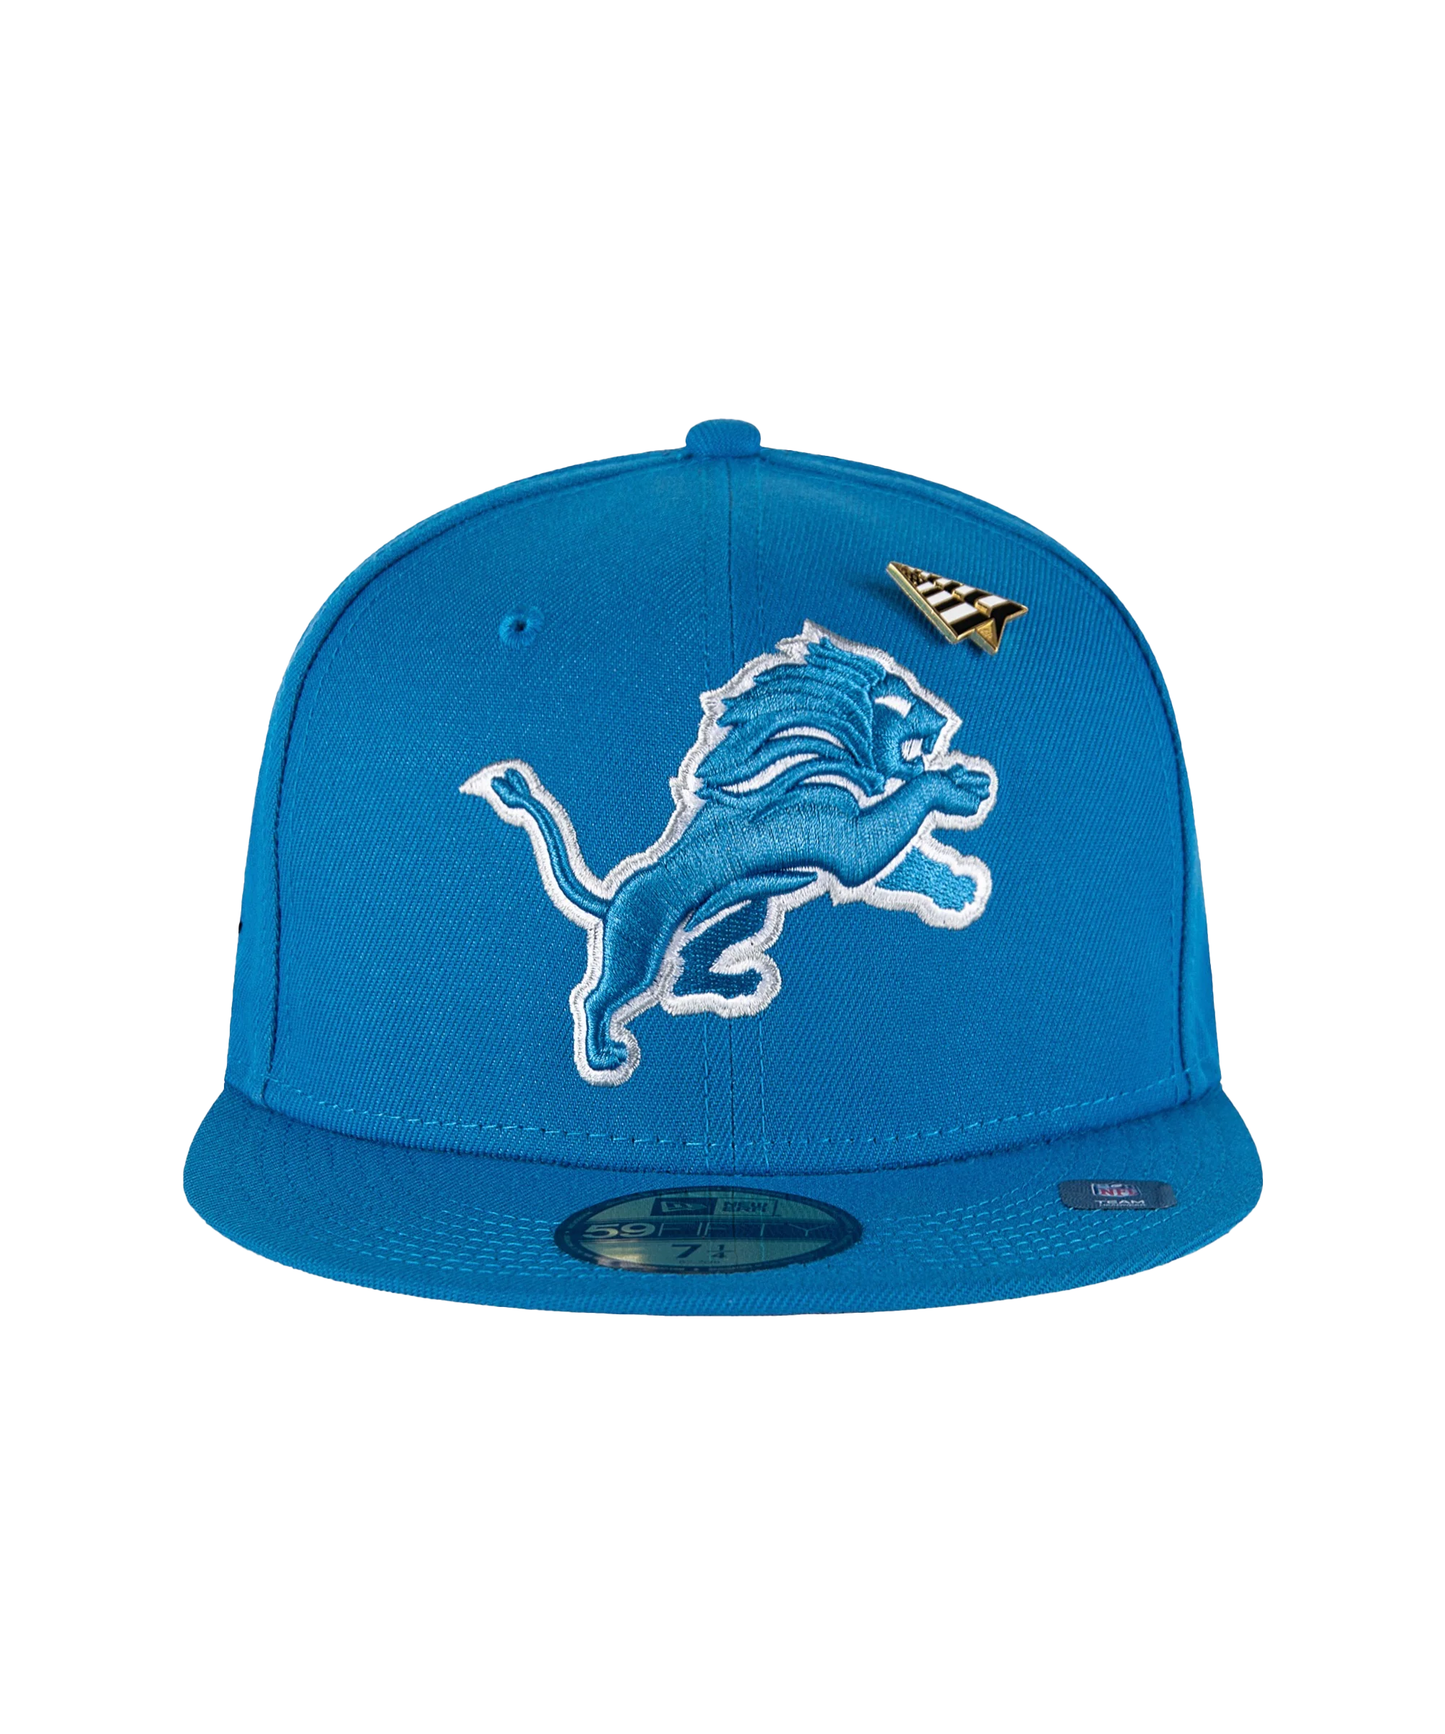 Paper Planes x Detroit Lions Team Color 59Fifty Fitted